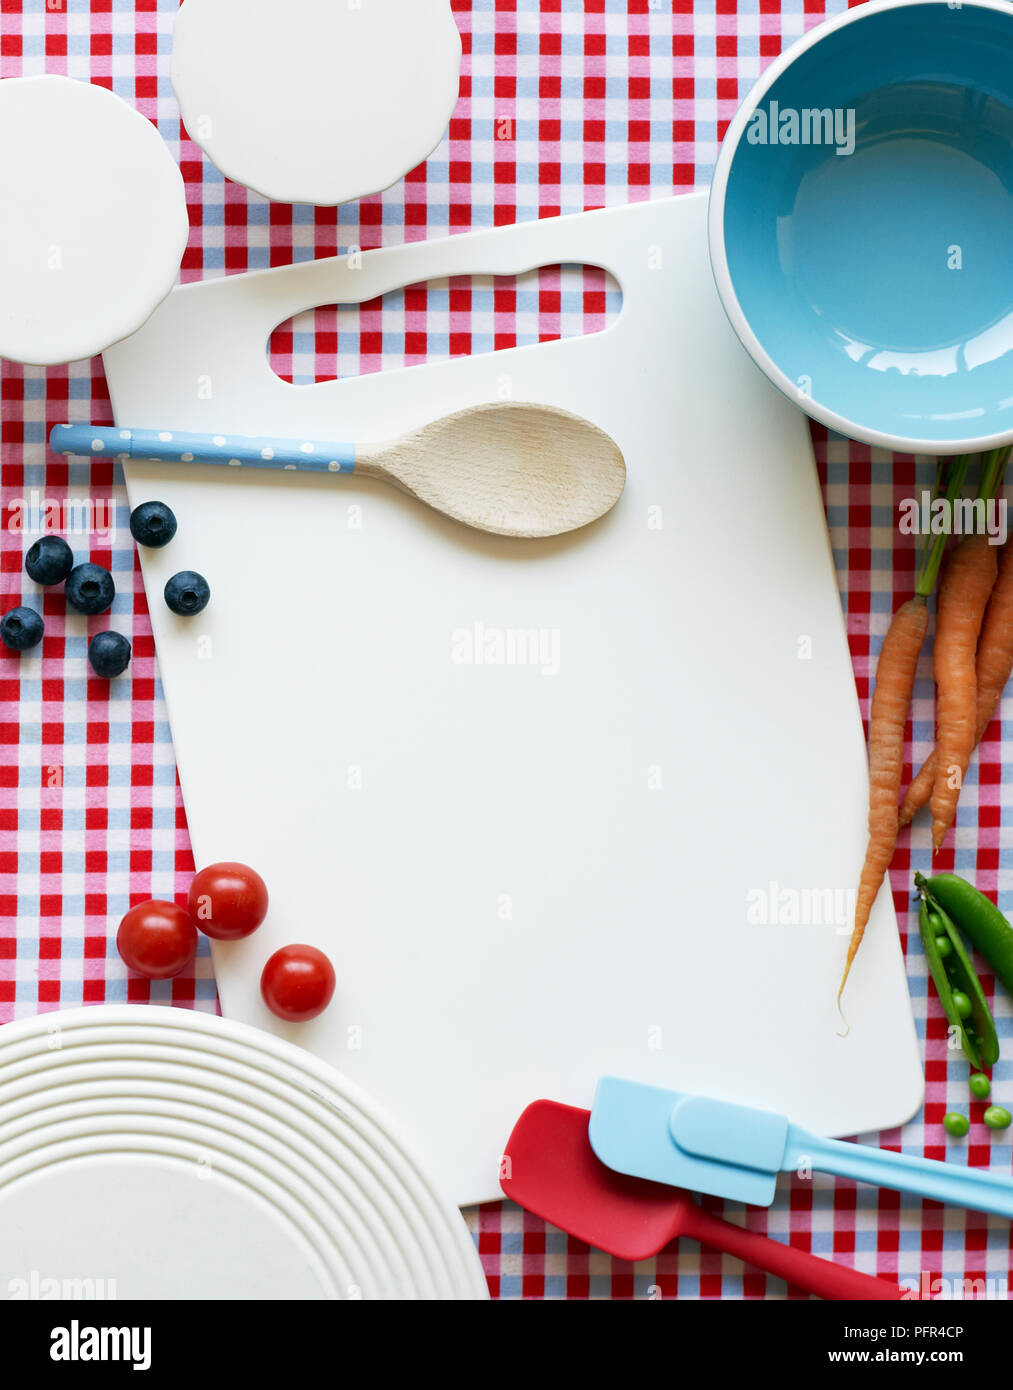 Various kitchen tools, including wooden spoon, chopping board, and spatulas, on red and white checked surface Stock Photo